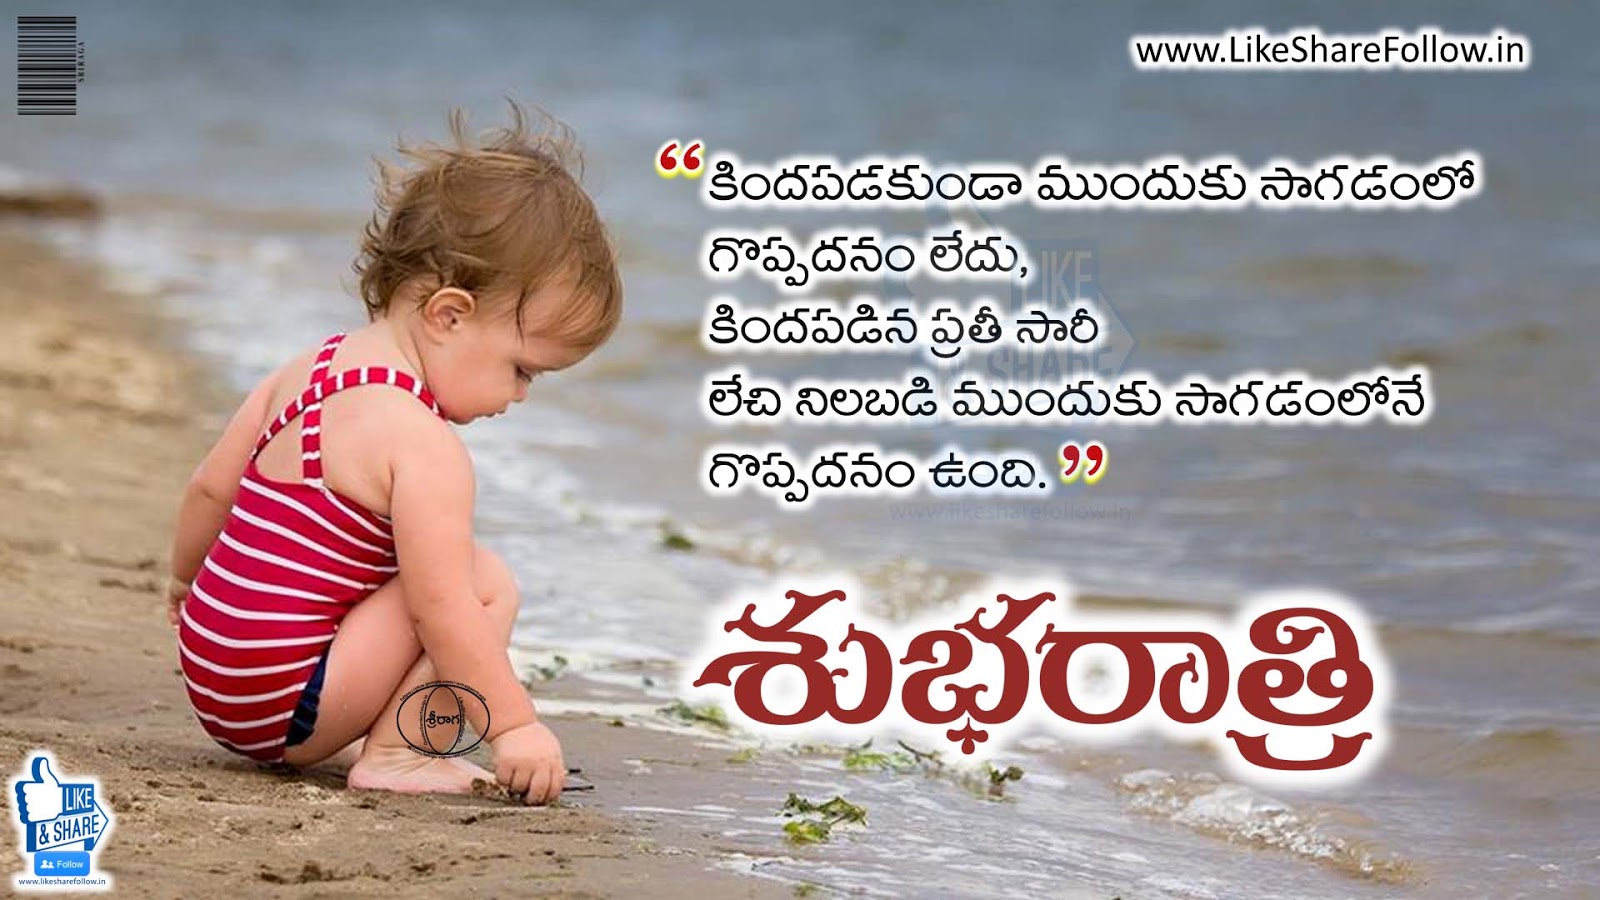 Latest good night quotes wishes in telugu | Like Share Follow